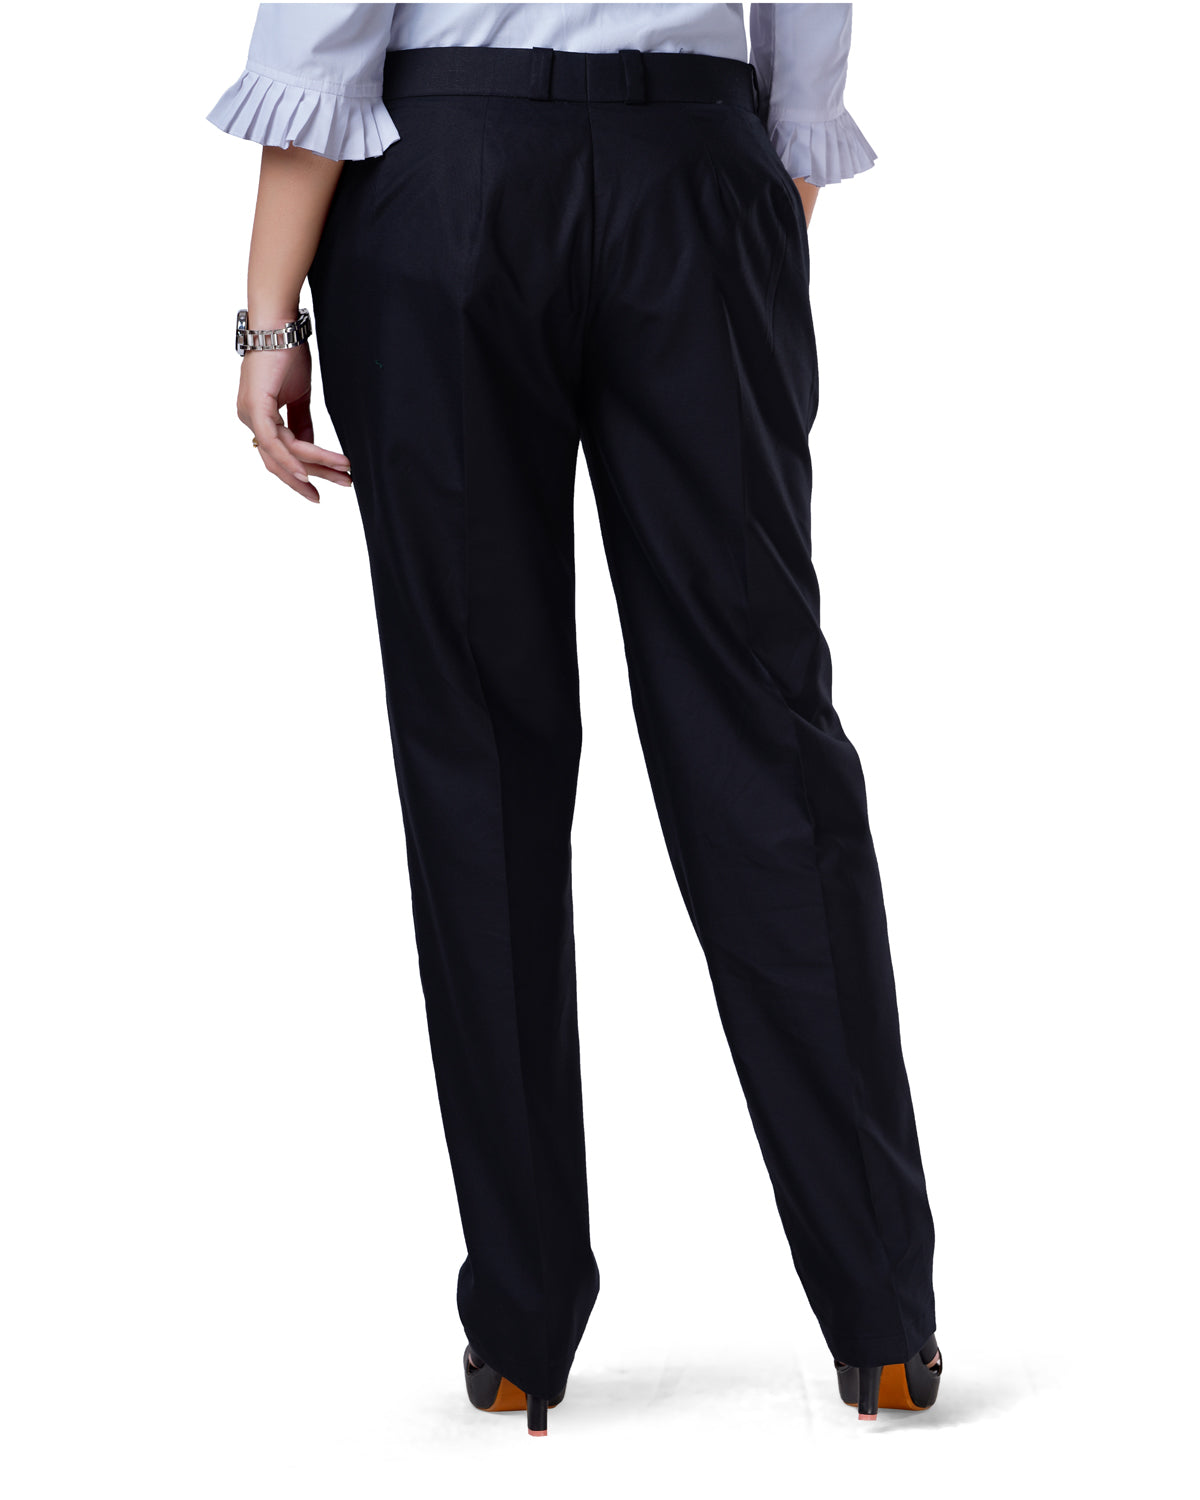 Dress Pants for Women High Waisted Zipper Wide Leg Pants Casual Baggy Comfy  Work Office Lounge Trousers with Pockets Ladies Clothes - Walmart.com